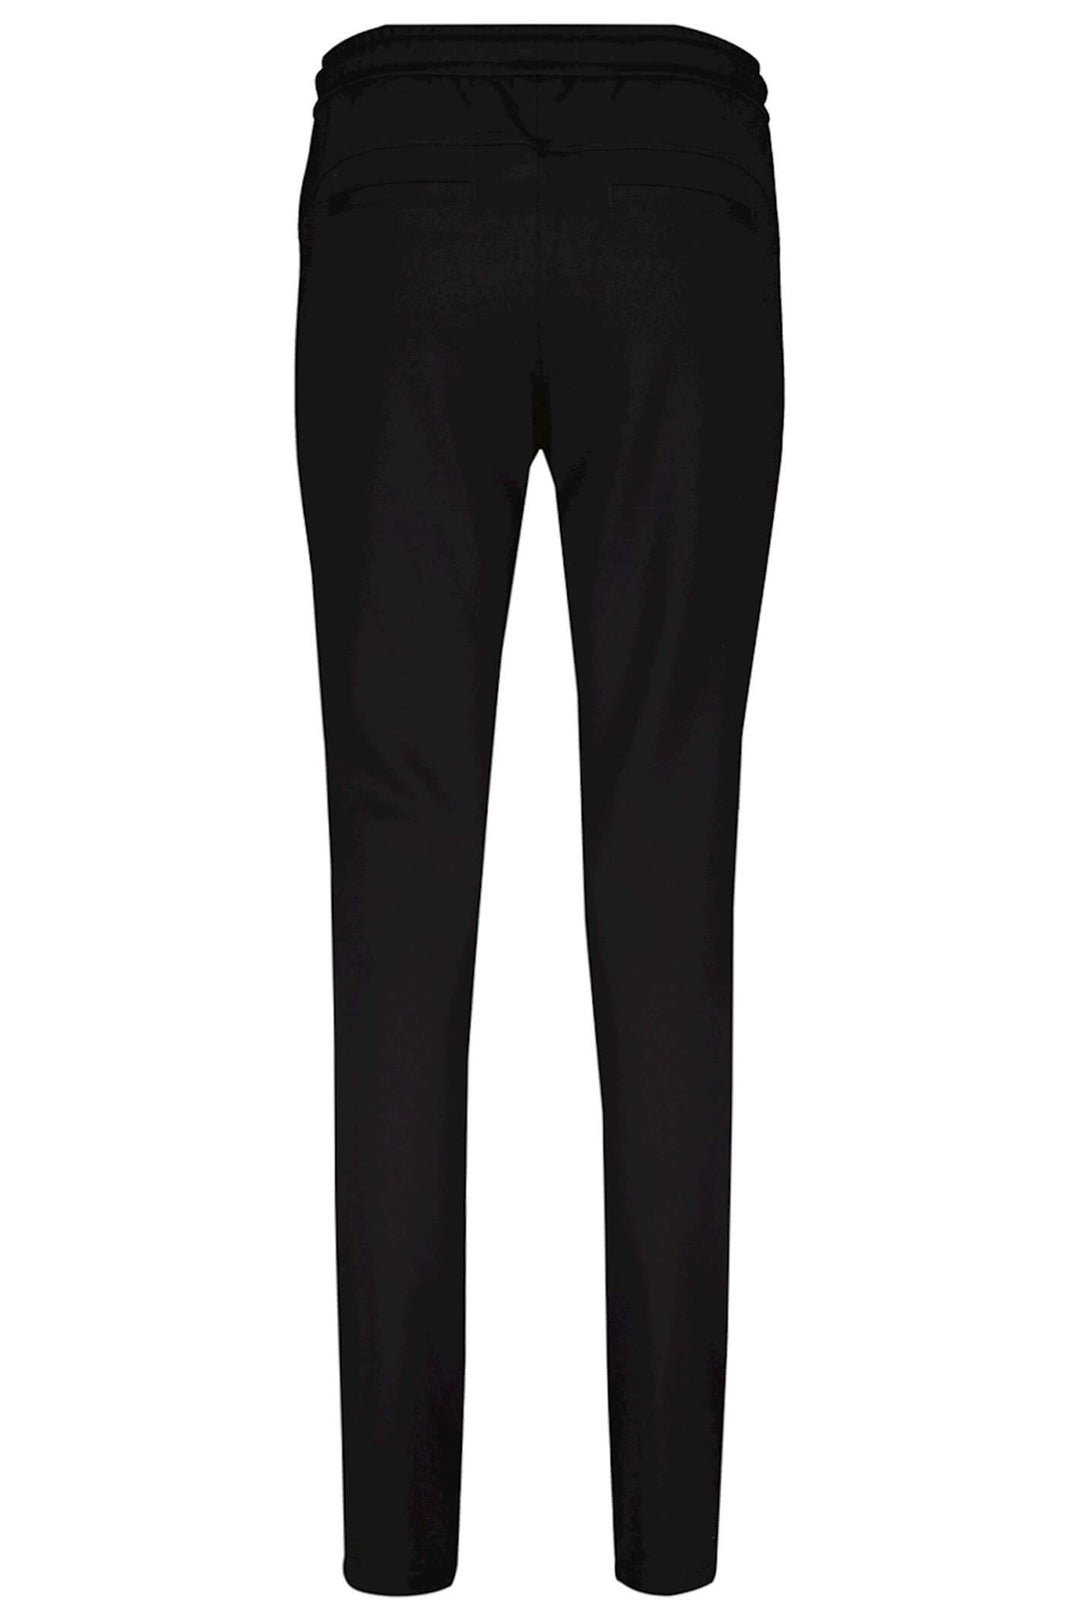 Red Button SRB4127 Tessy Black Punta Pull-On Trousers - Olivia Grace Fashion